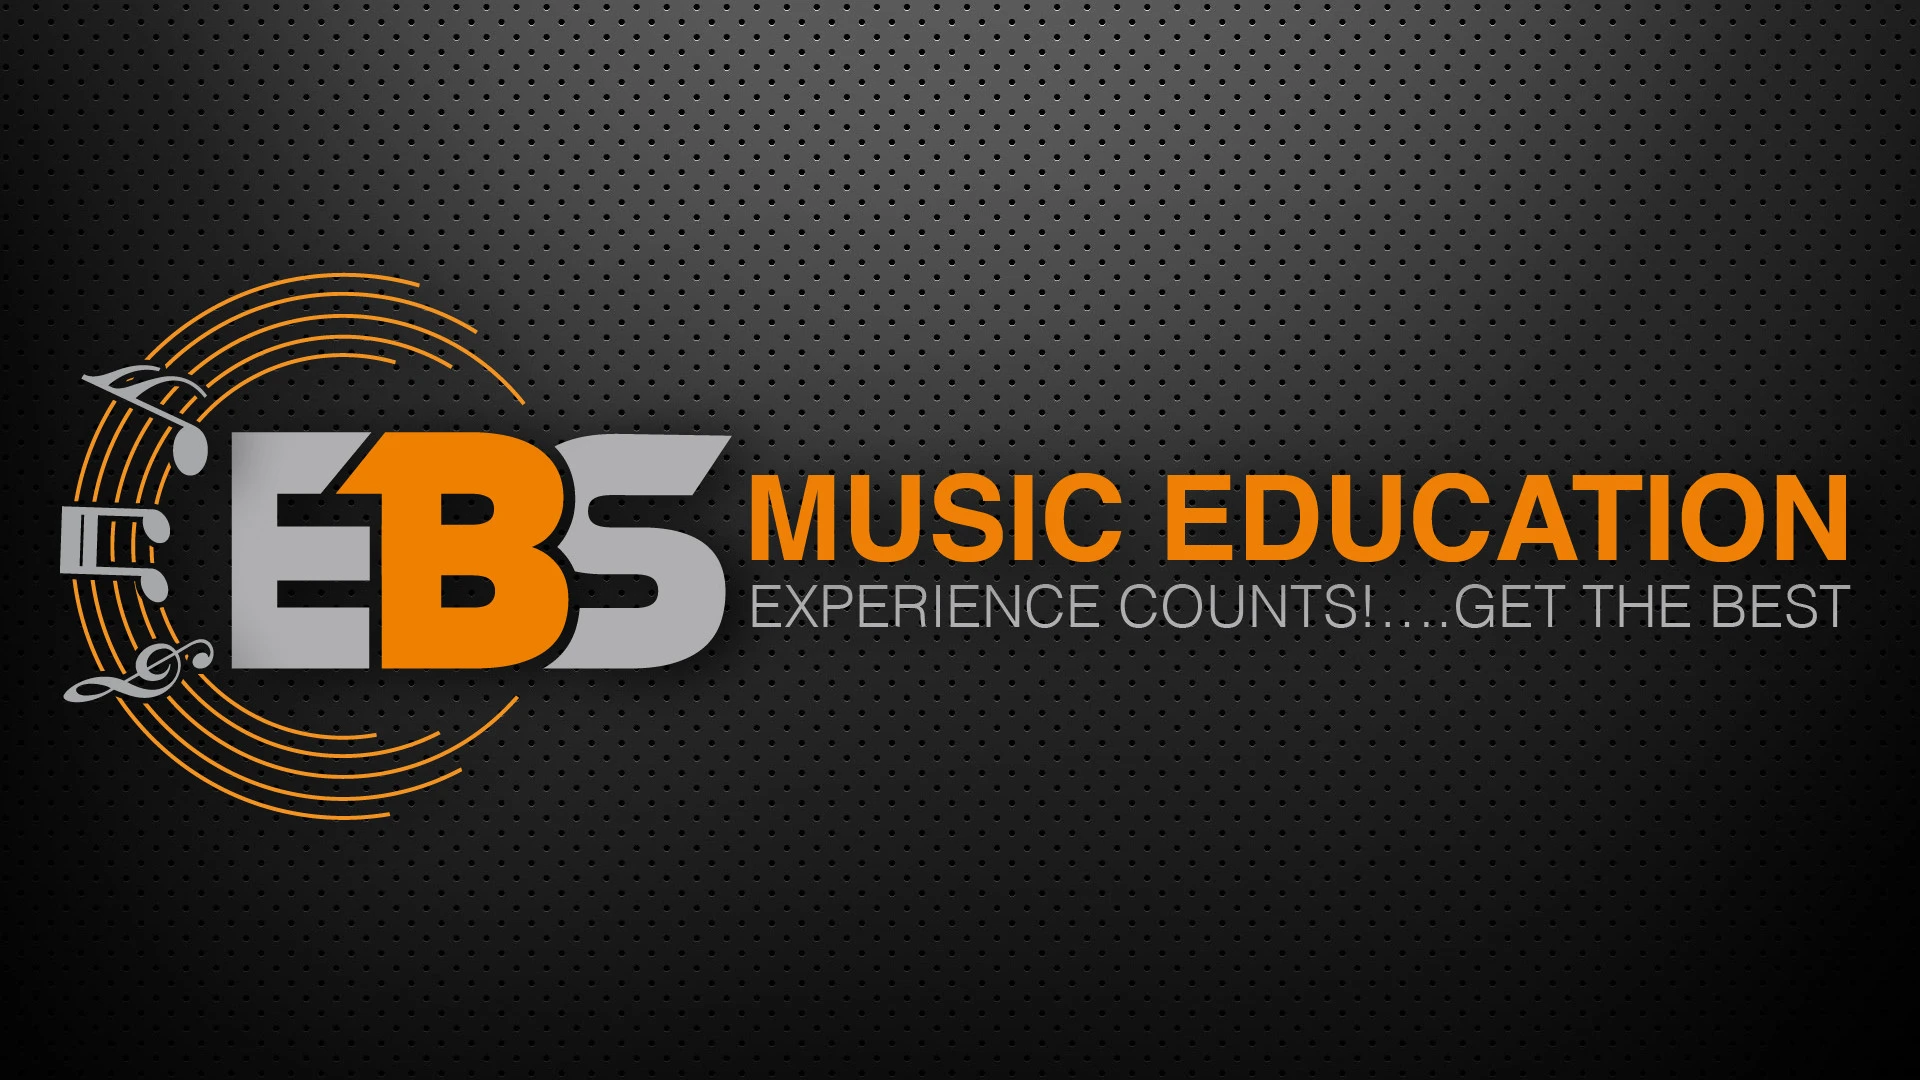 EBS Music Education Services